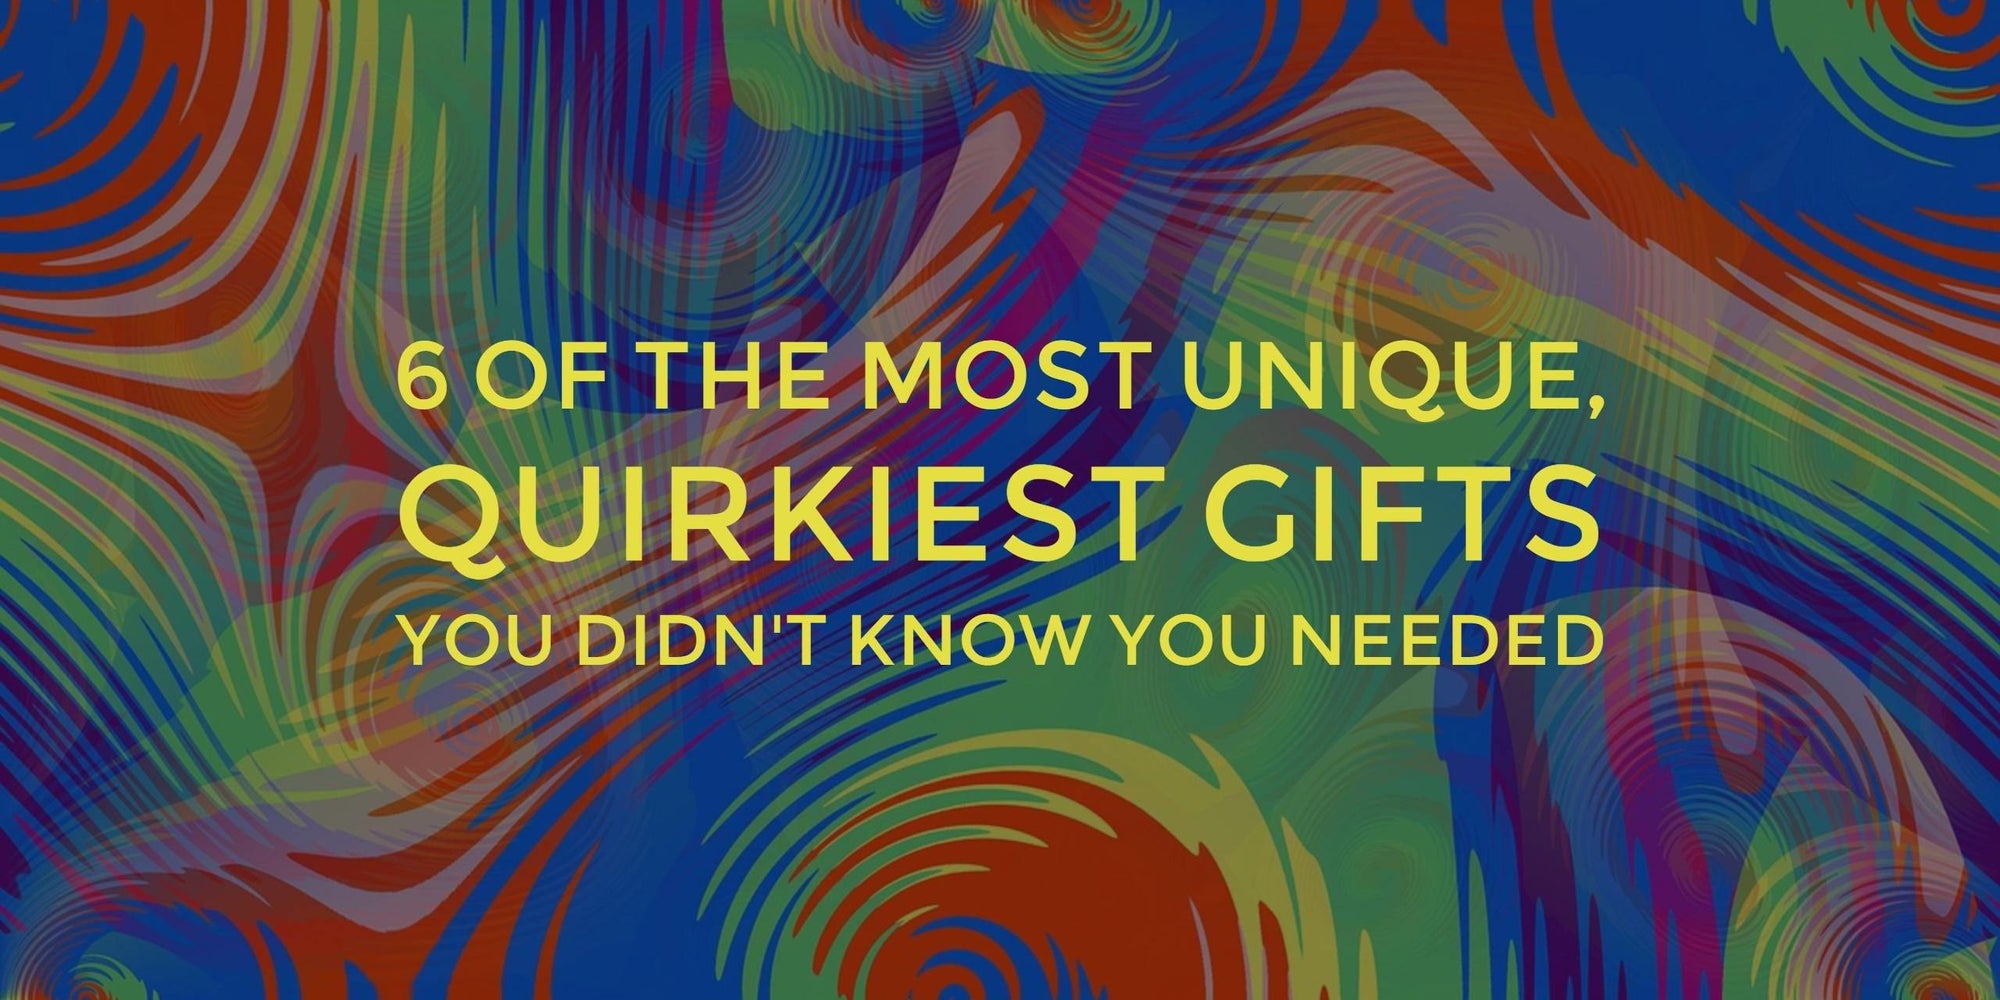 Weird Gifts You Didn't Know You Needed